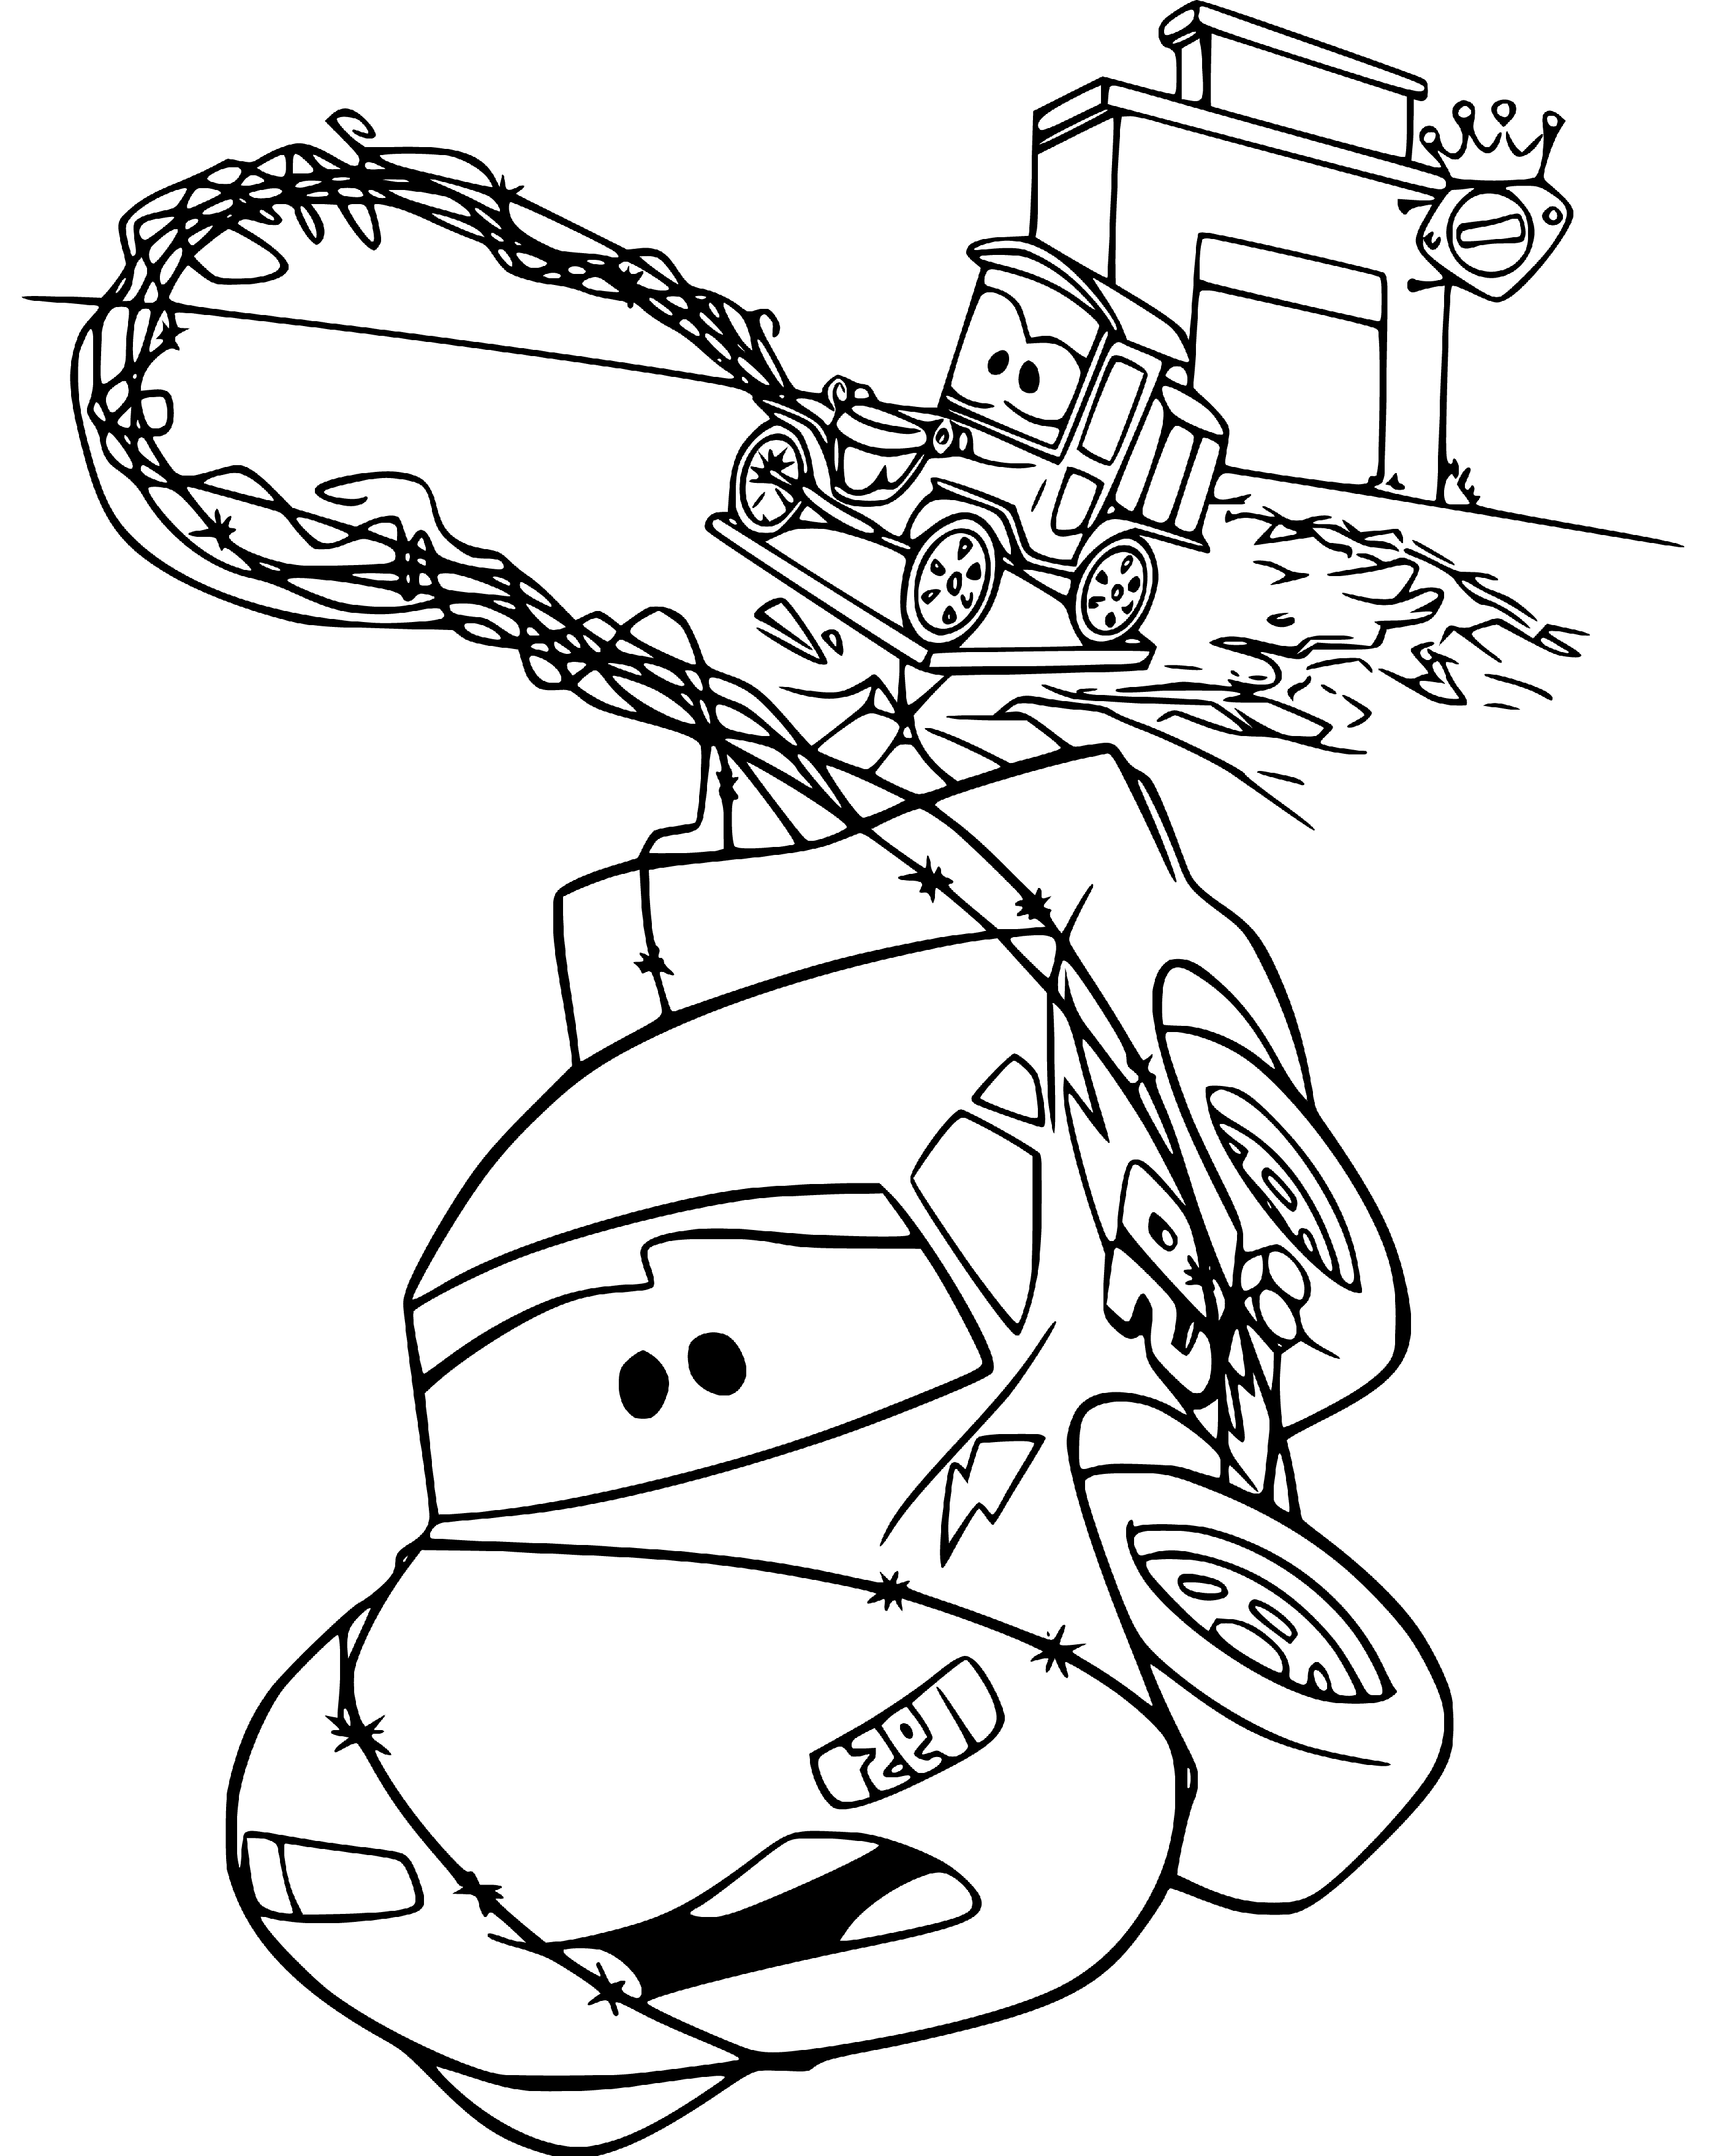 Cars on the Road Coloring Pages for Kids Printable - SheetalColor.com